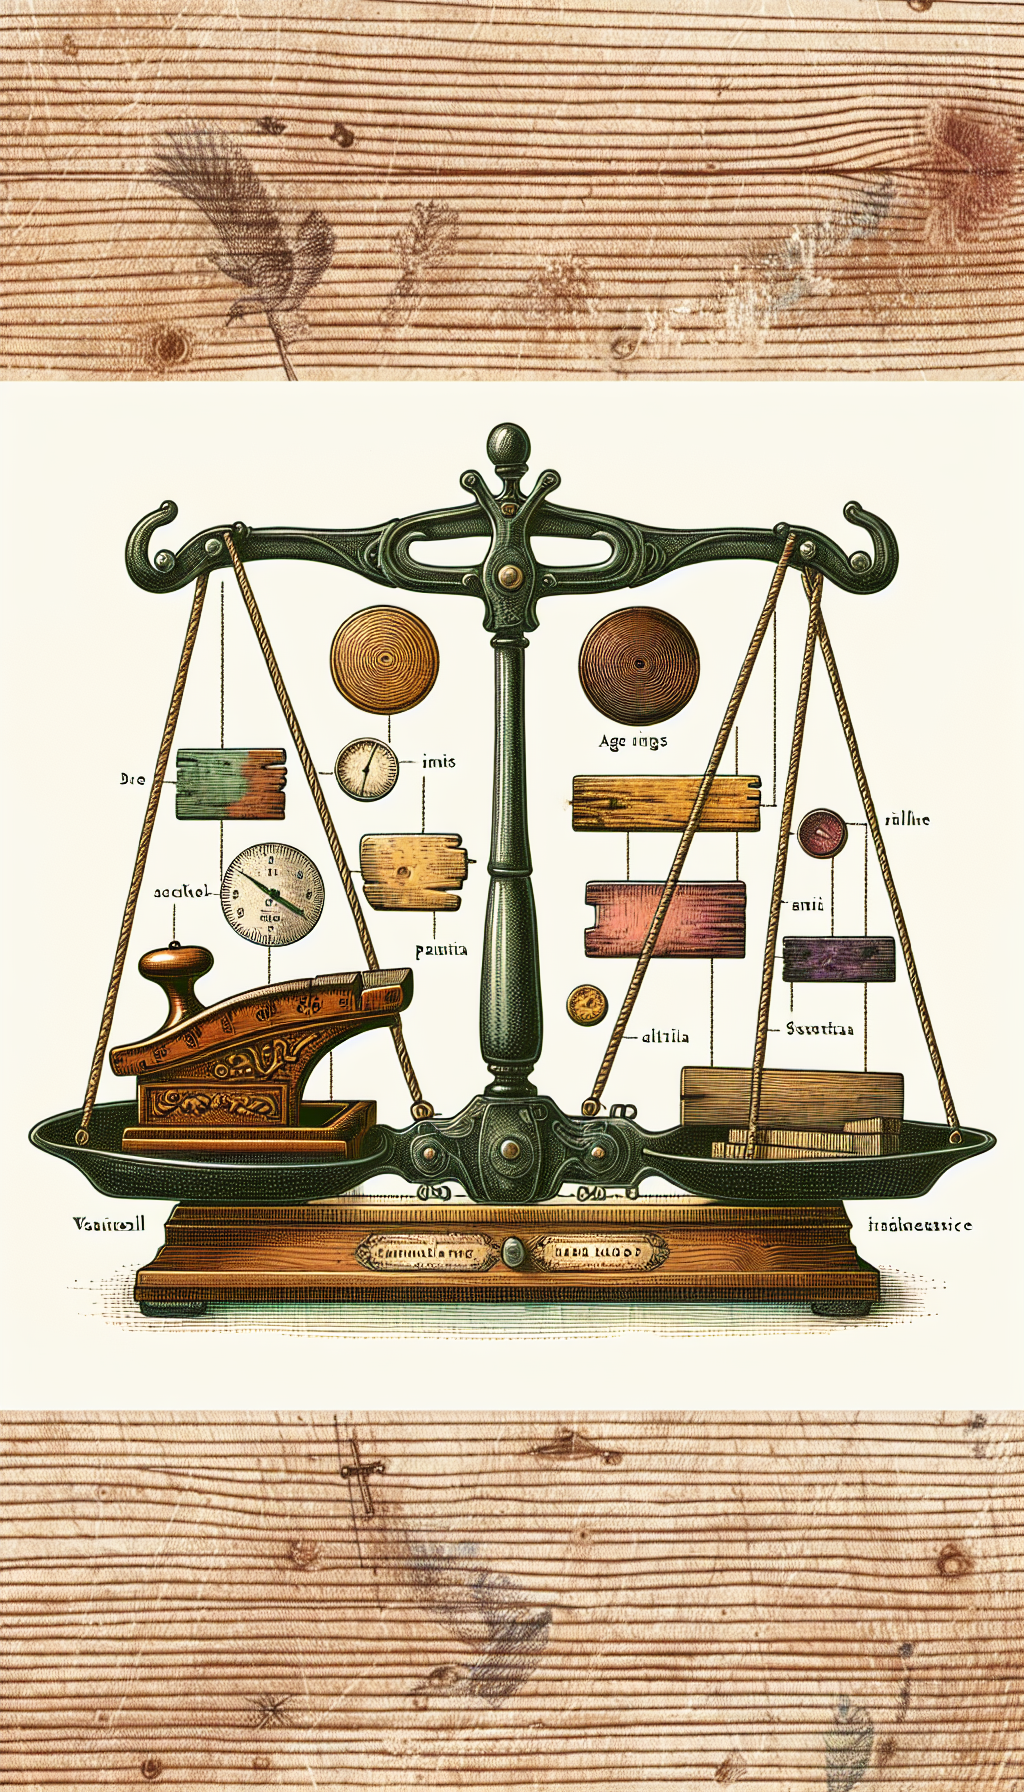 A whimsical balance scale illustration, with one side holding an elegant antique wood planer, and the other various illustrated factors like age rings, patina swatches, and a branded label for 'historical significance'. Each factor dangles on strings from the scale, highlighting their weight in determining the planer's value, blending vintage engraving and colorful watercolor styles to differentiate the elements.